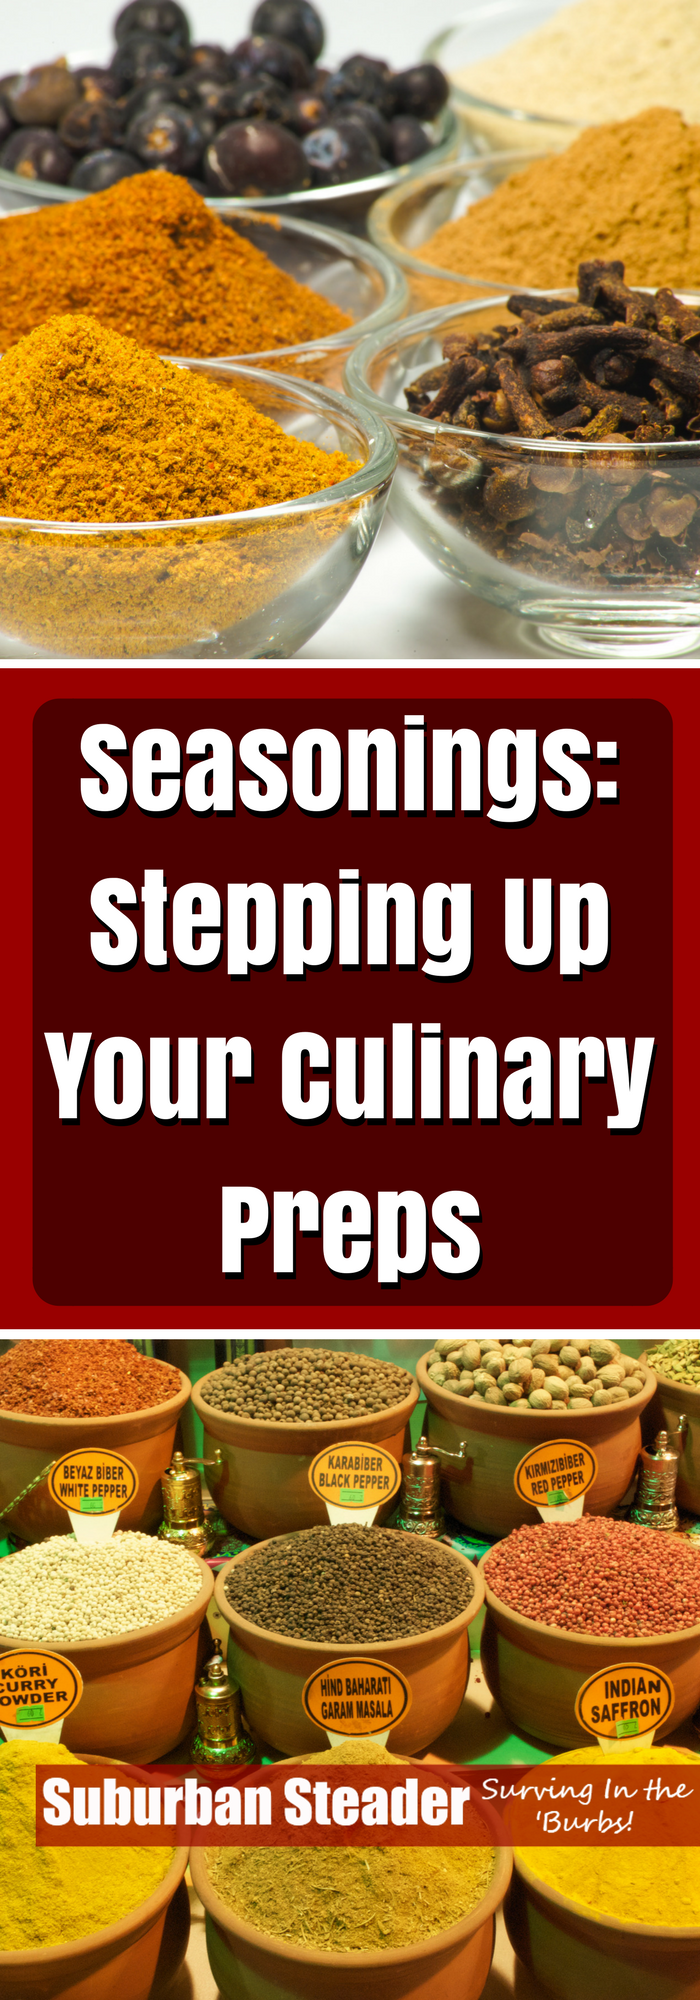 Seasoning: Stepping Up Your Culinary Preps